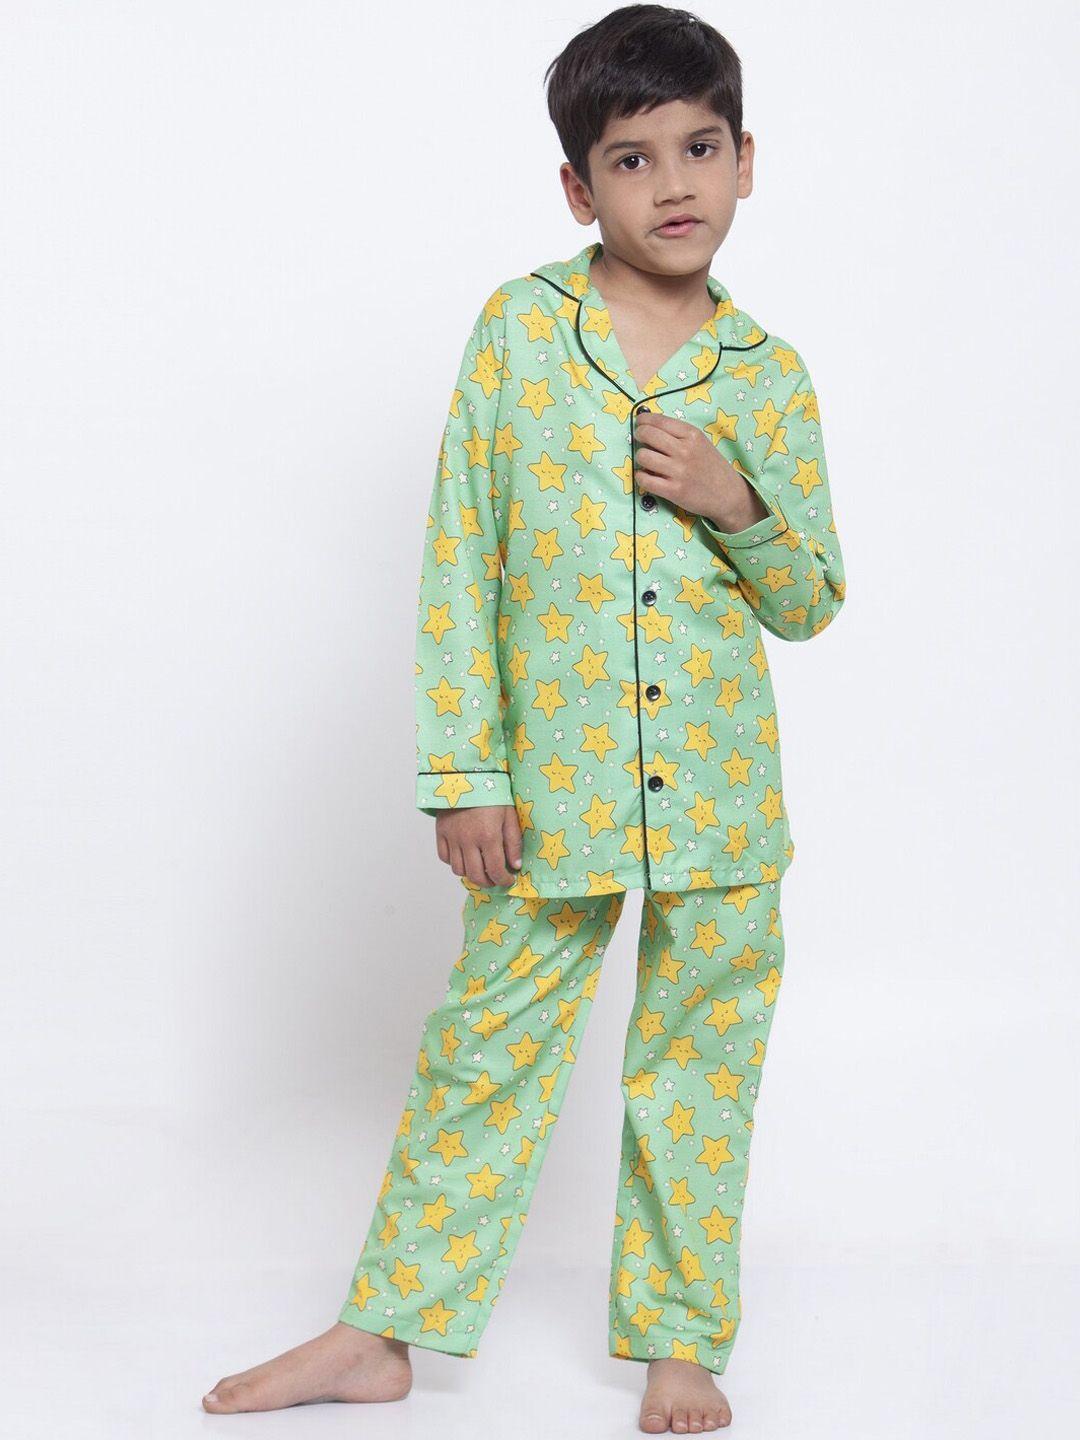 maxence boys green & yellow printed night suit